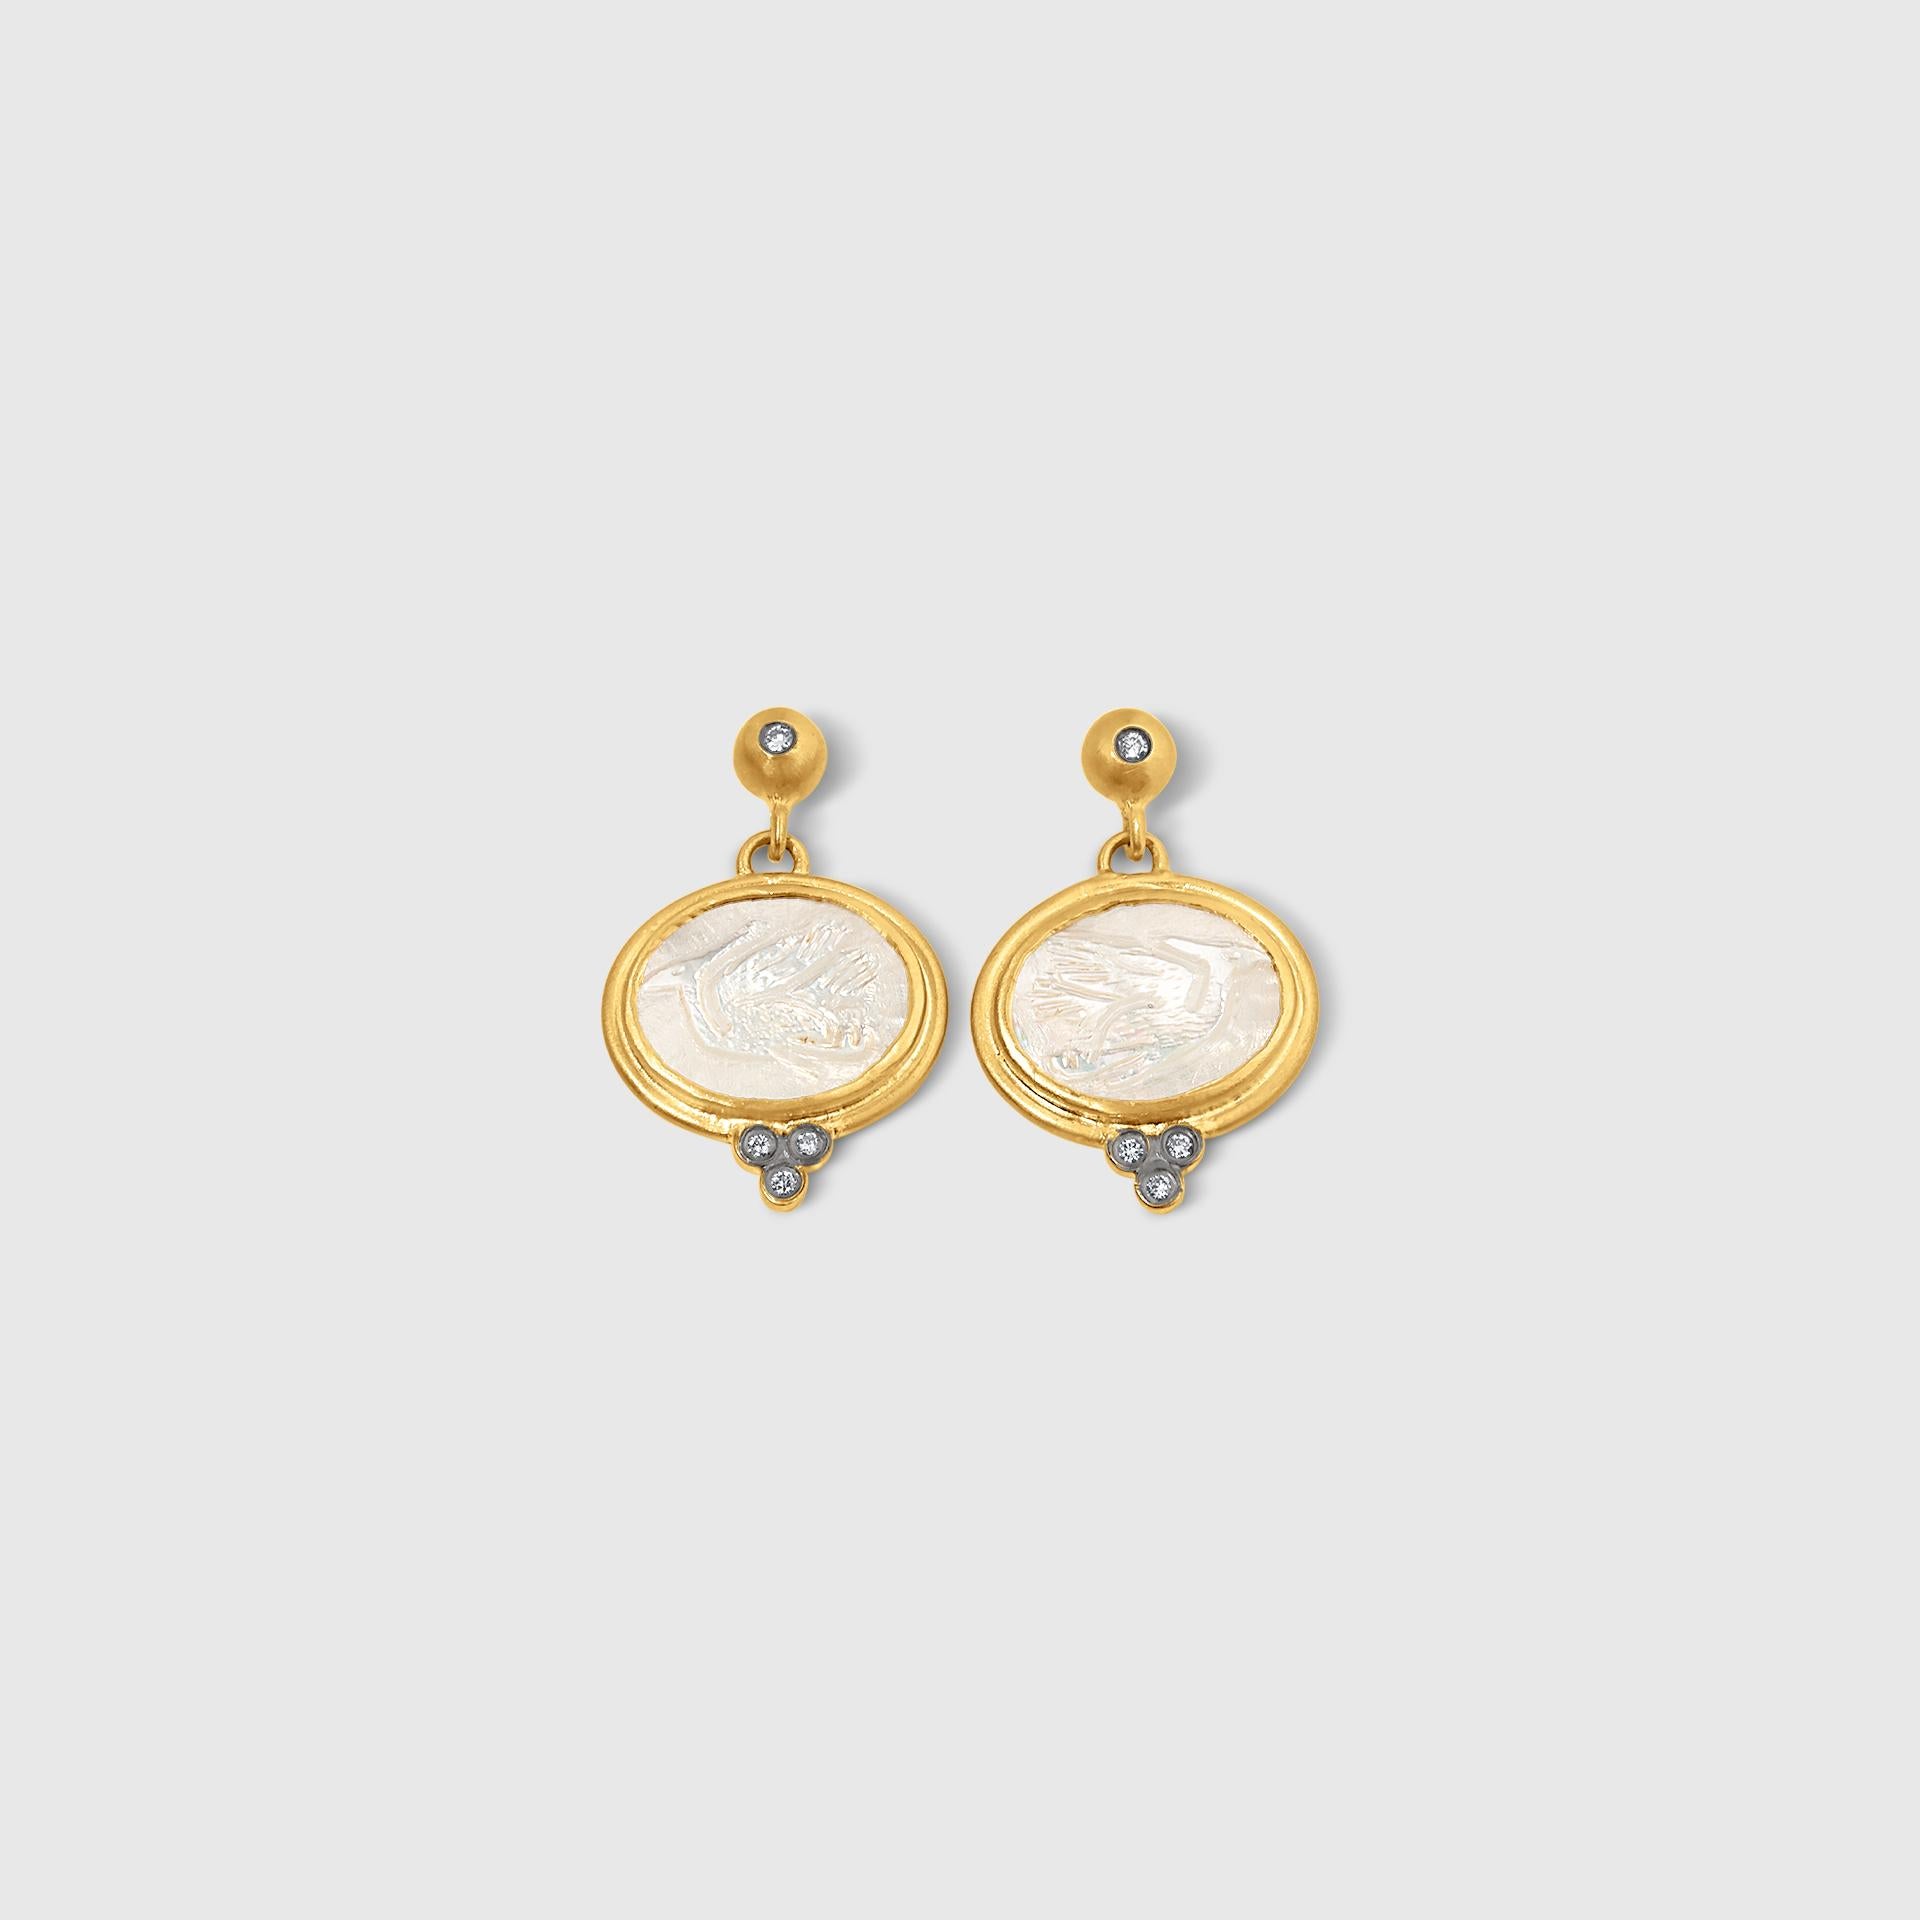 Mother of Pearl Earring with Carved Crane Motif, 24K and Diamonds, Post earrings, 24K goldfused and sterling silver, by Kurtulan Jewellery of Istanbul, Turkey

About Kurtulan:
Kurtulan jewellery manufacturing company is based in Istanbul Turkey.